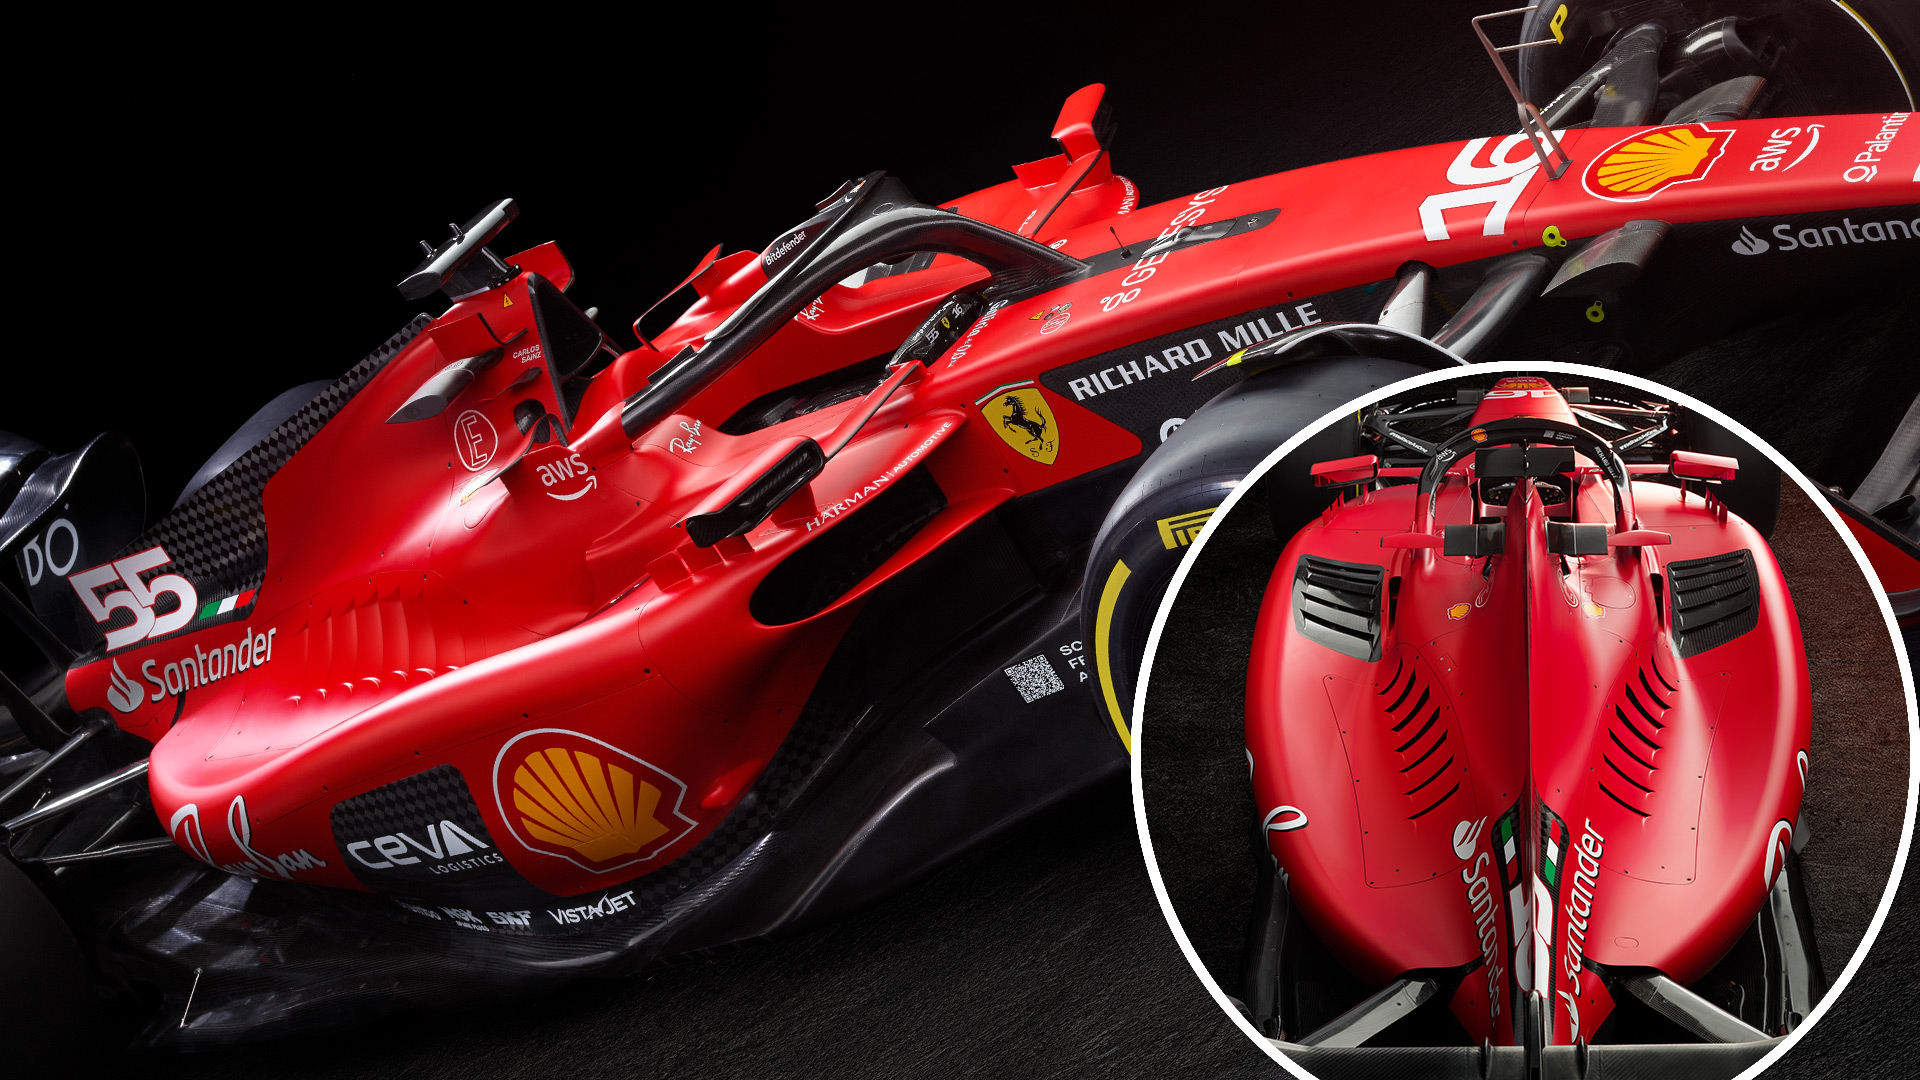 Pair of Ferrari V-10 Formula 1 Engines for Sale Right Now